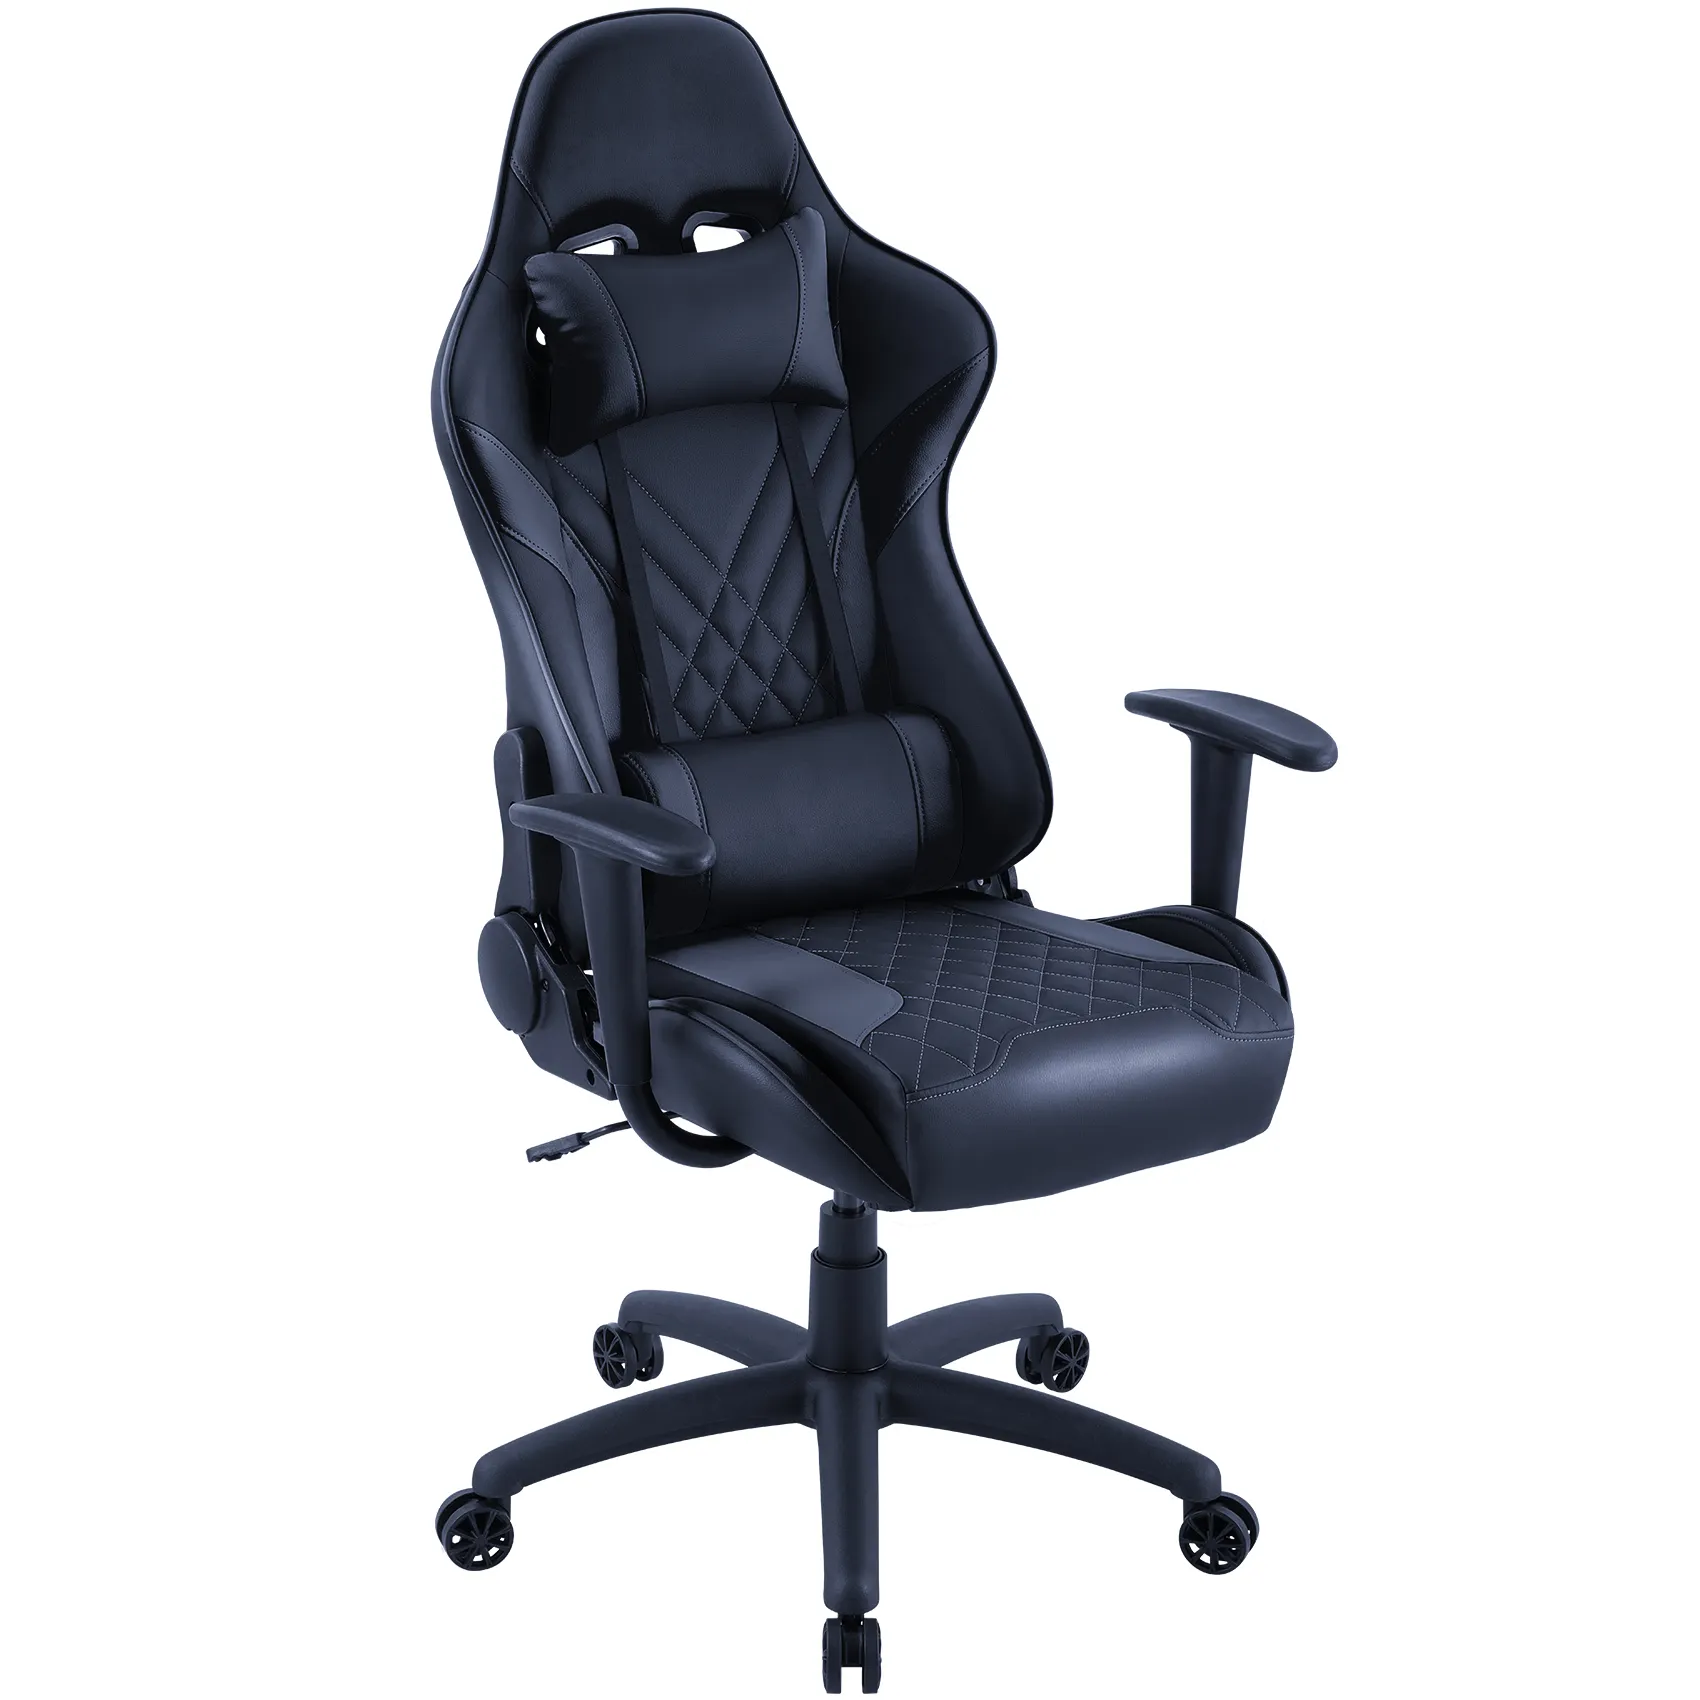 Ergonomic Gaming Chair High Back Leather Swivel Chair Adjustable High